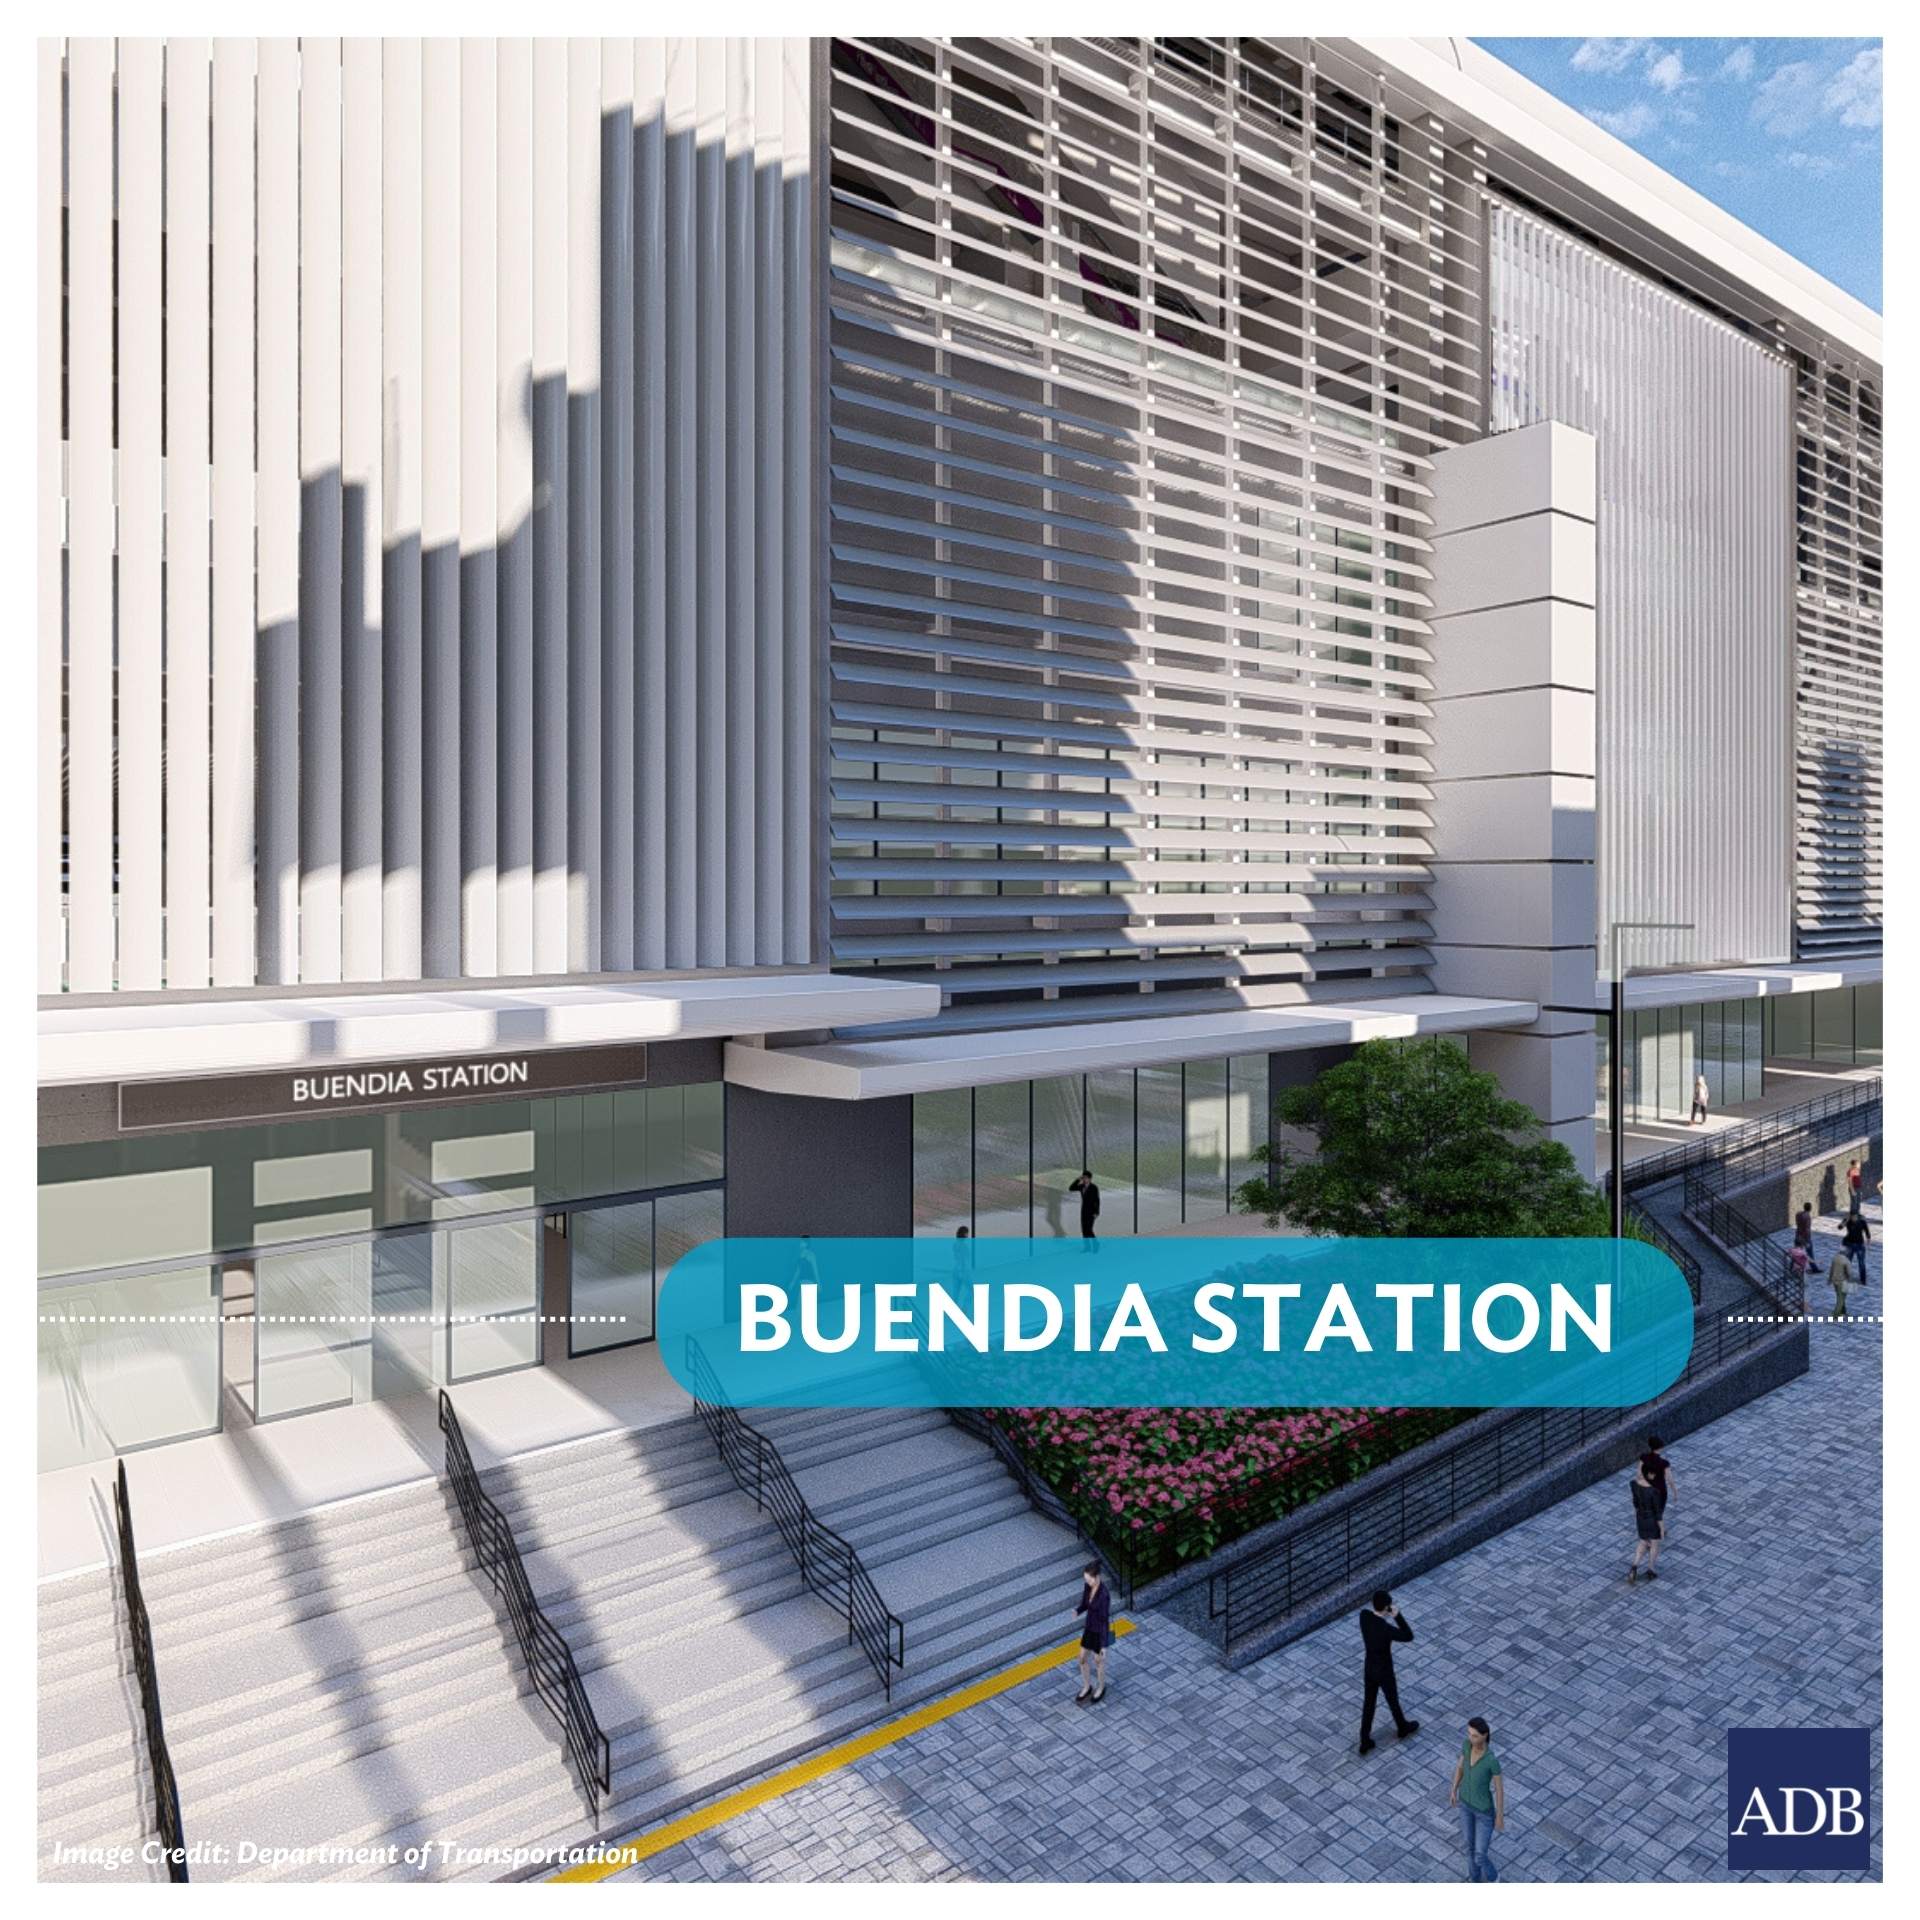 ADB shows renderings of South Commuter Railway stations 4